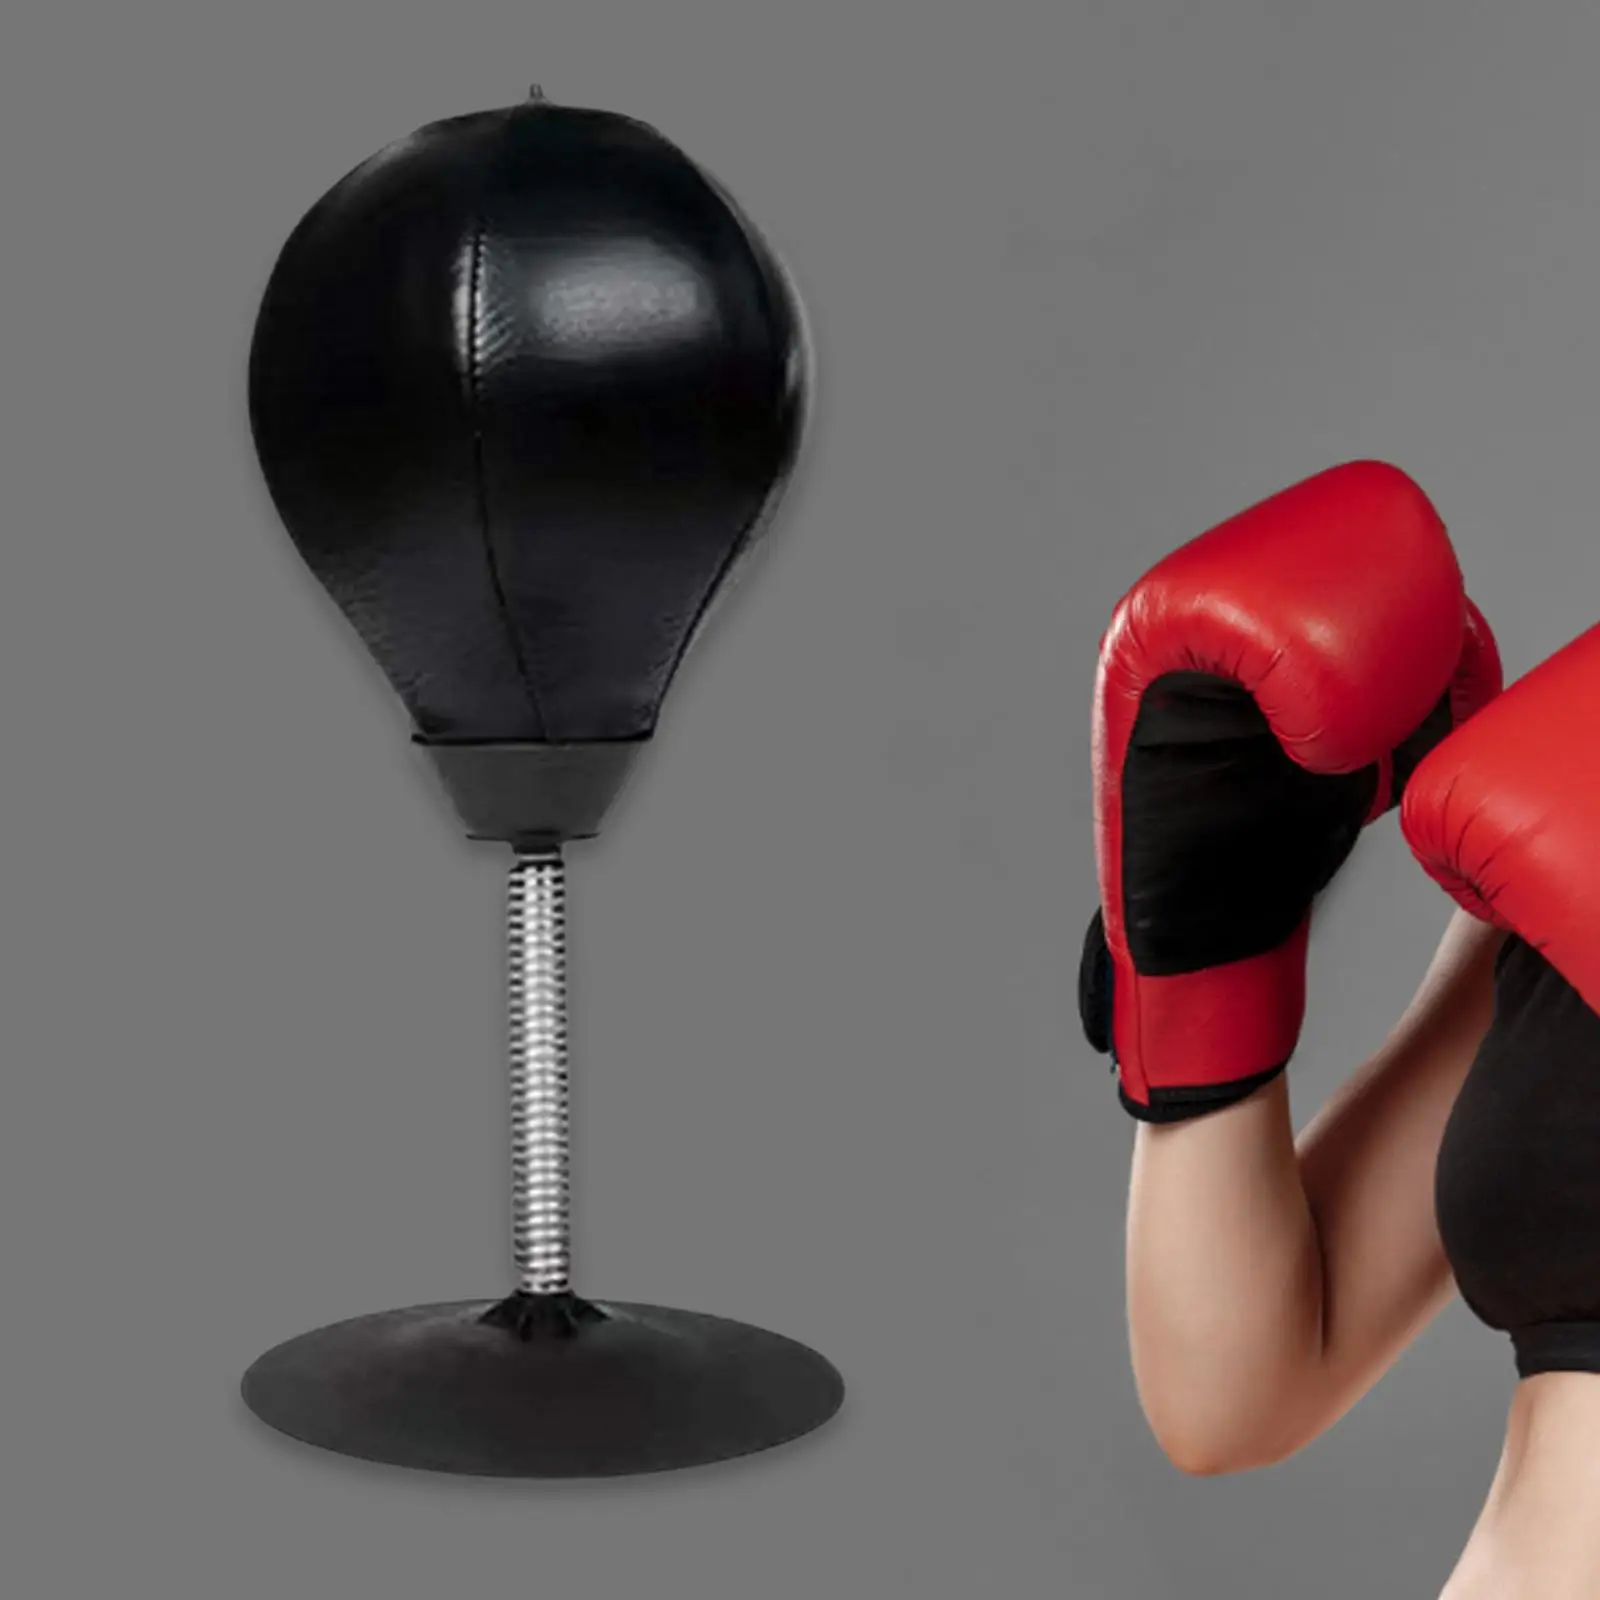 Desktop Punching Bag Decompression Toy Professional Speedballs Reaction Speed Balls Ball for Sports Training Boxing Fighting Gym